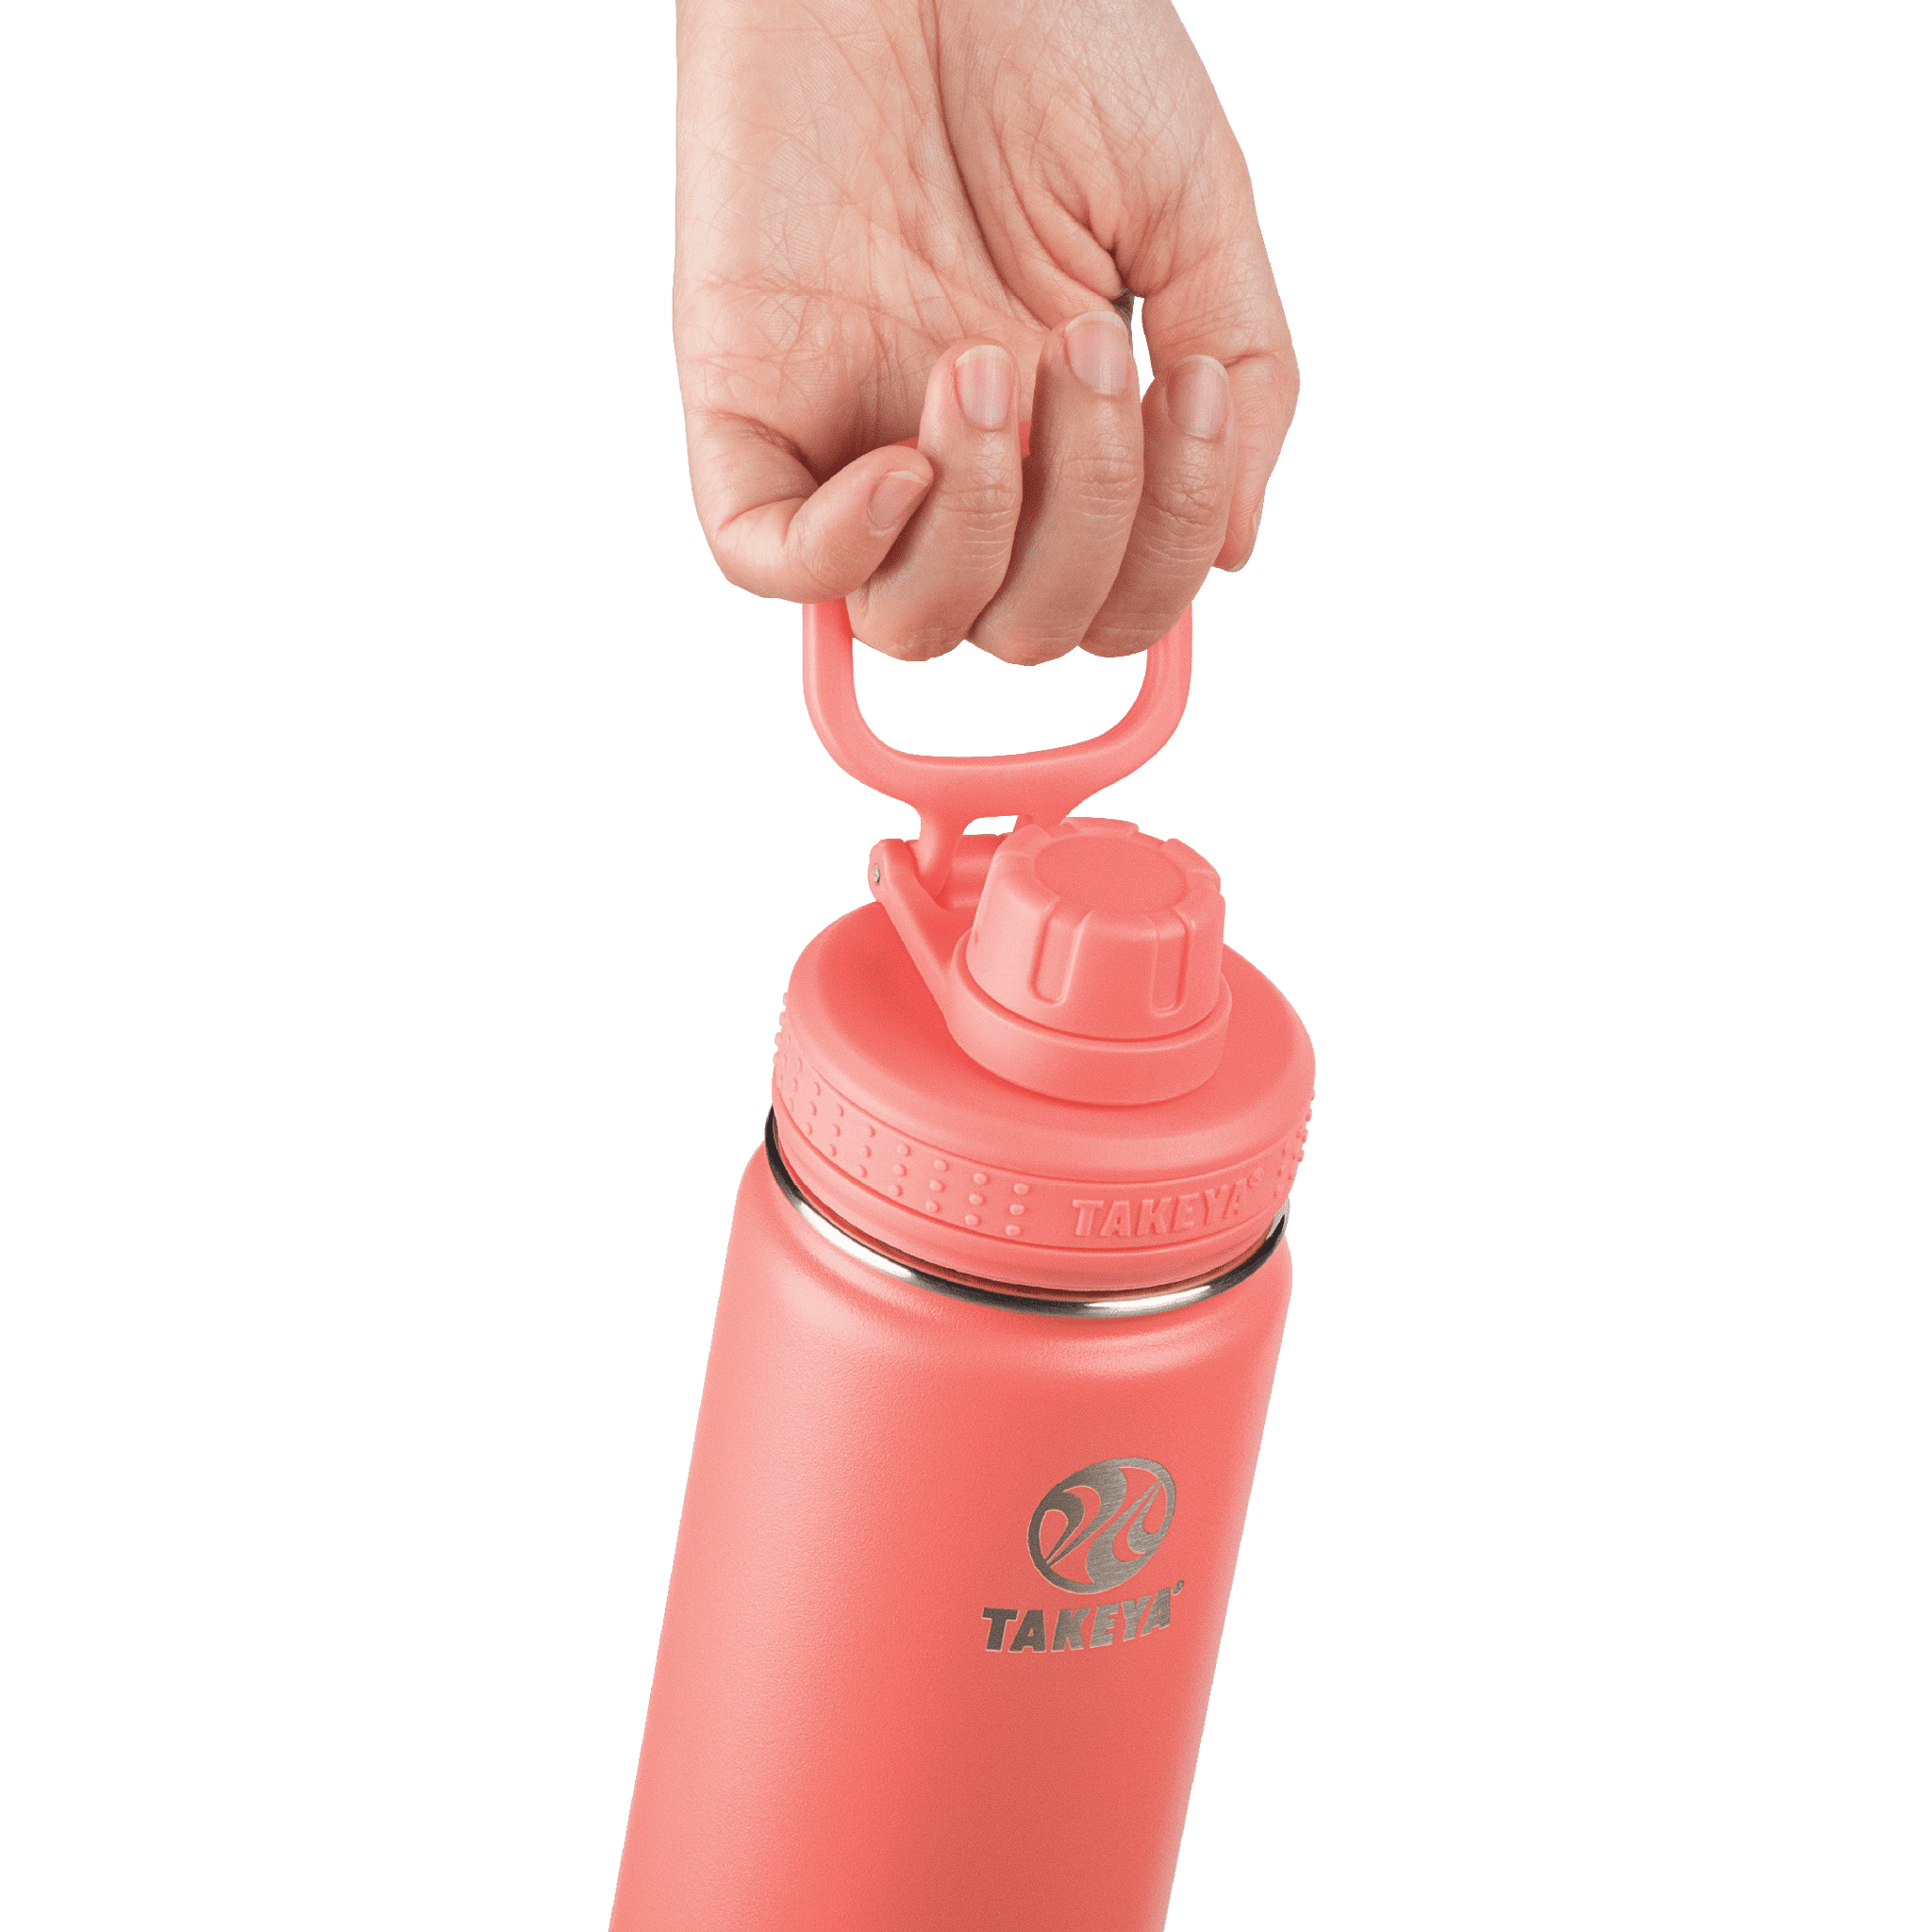 Takeya 18oz Actives Insulated Stainless Steel Water Bottle with Straw Lid - Lavender Fields